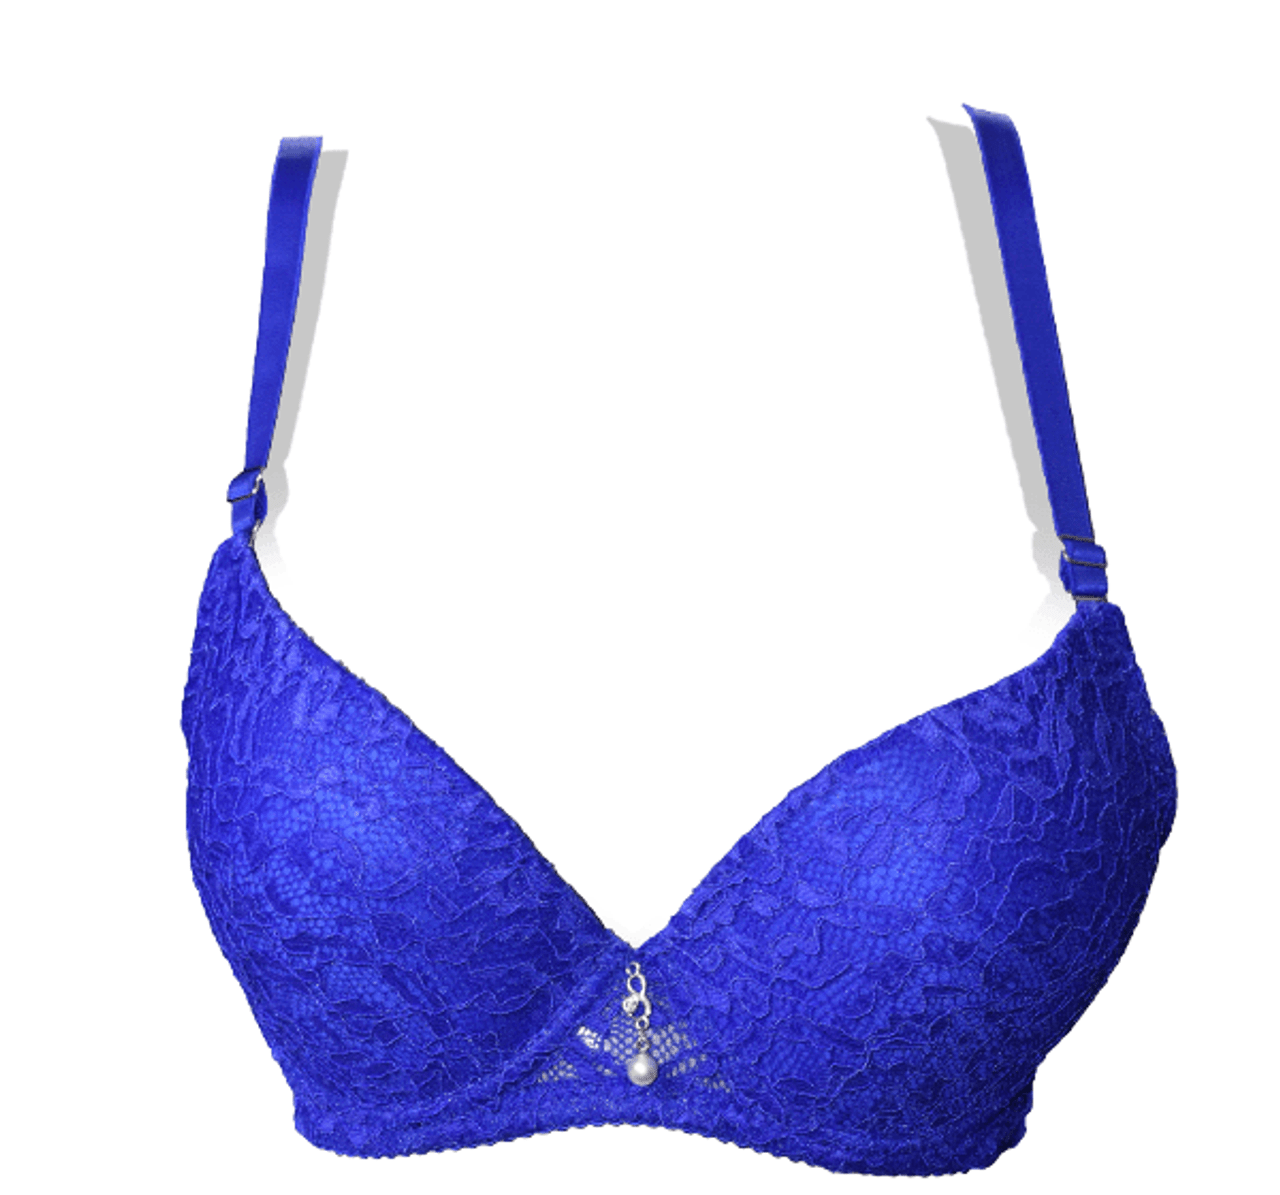 Buy PrettyCat Blue Lace Underwired Heavily Padded Push Up Bra PC BR 5077 -  Bra for Women 6556126